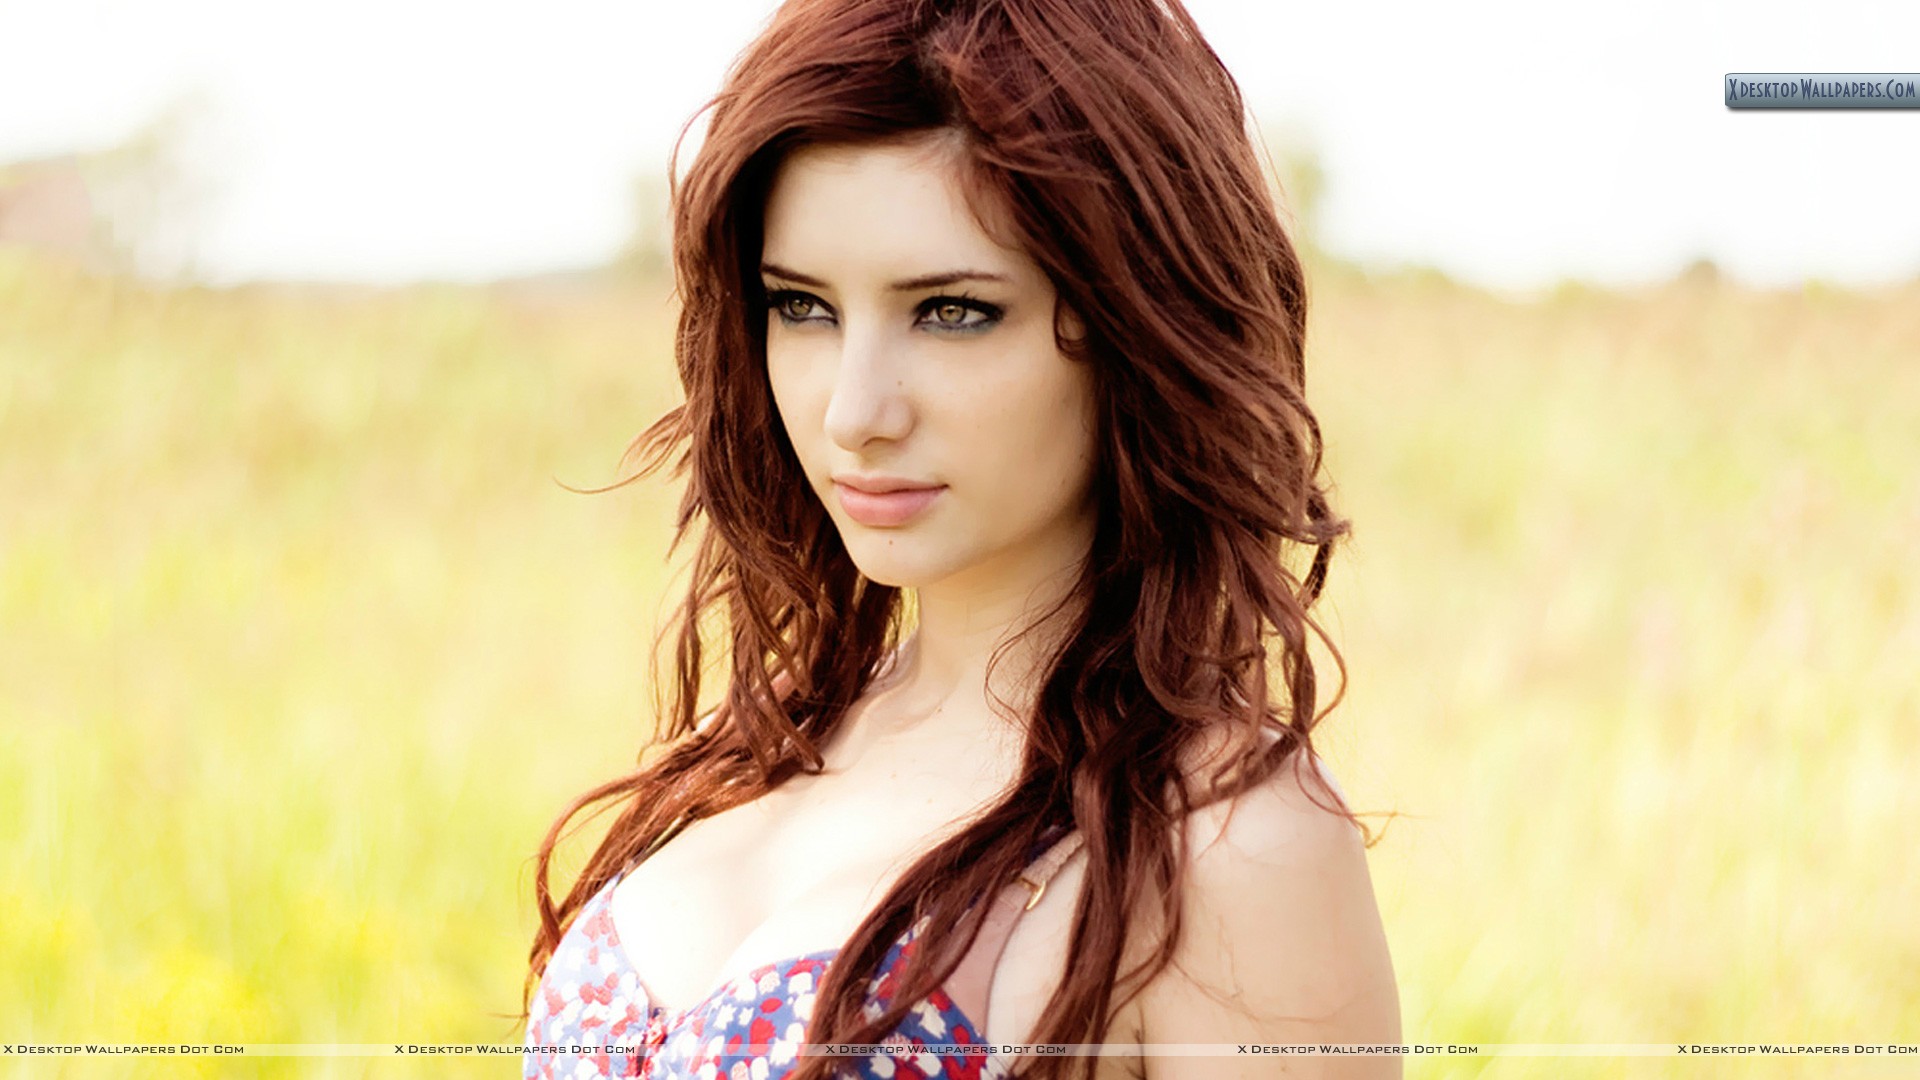 Images of Susan Coffey | 1920x1080